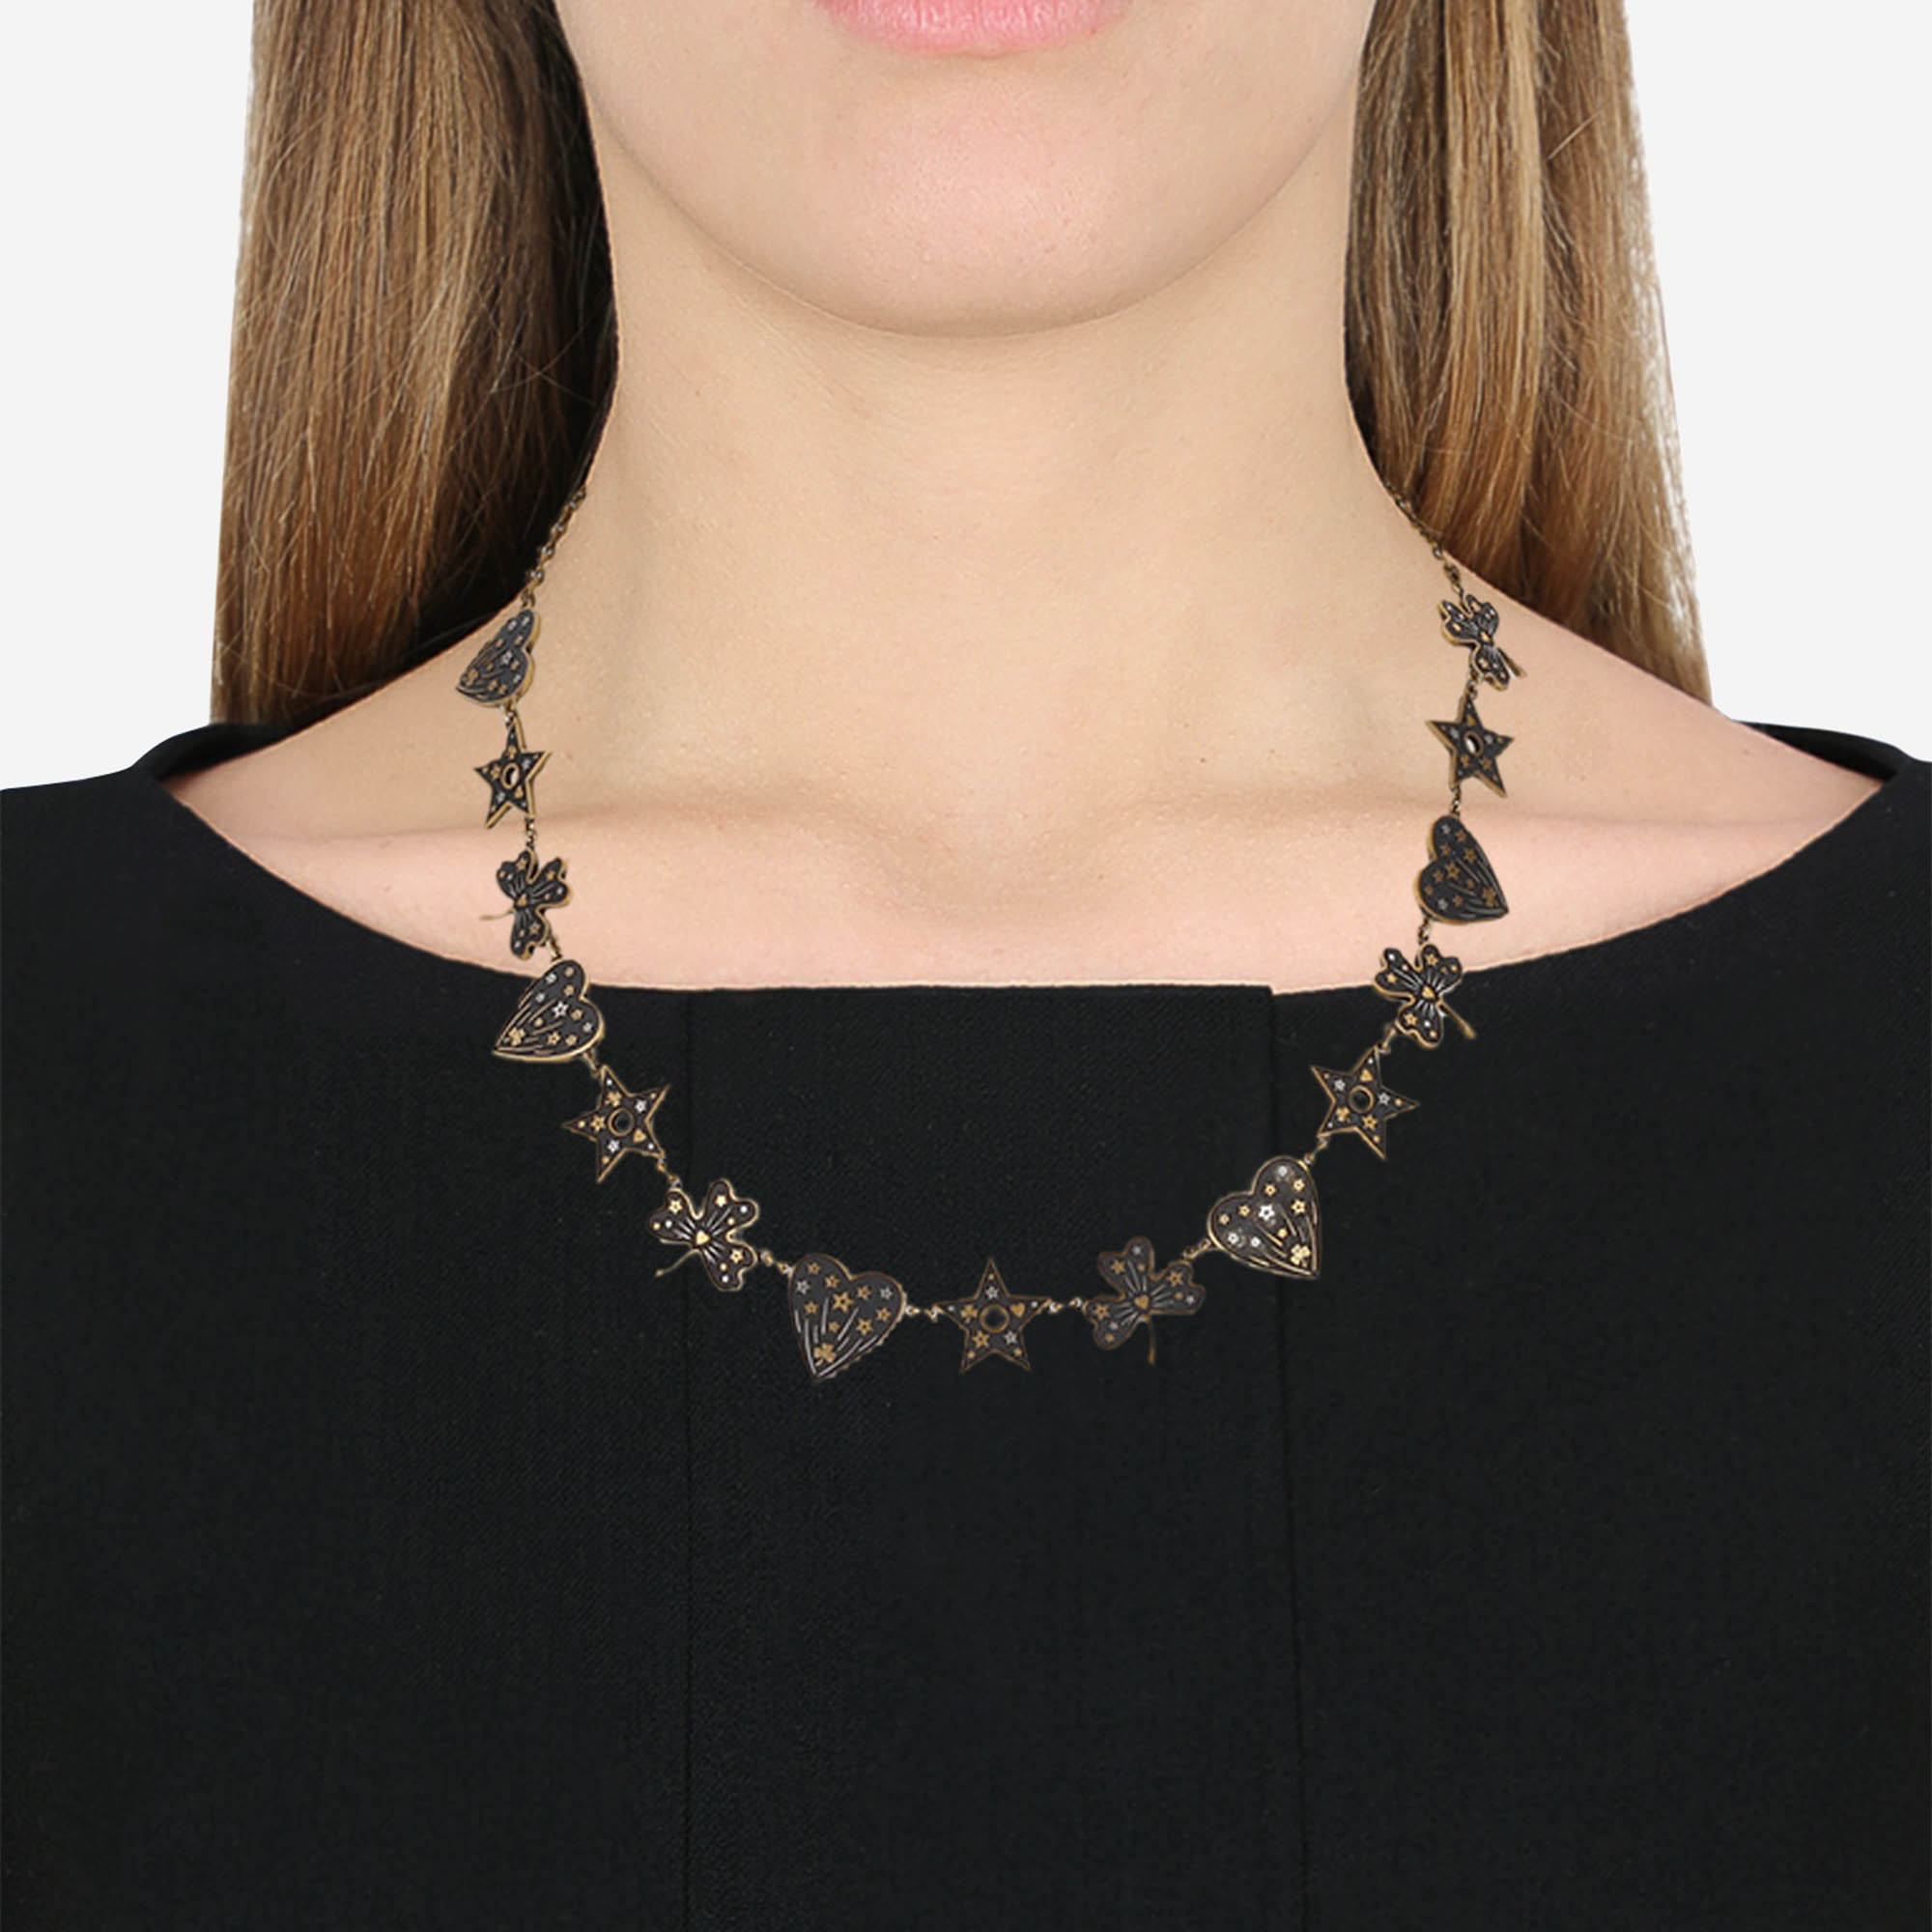 Dior  Women's Metal Collar Necklace - Black - One Size